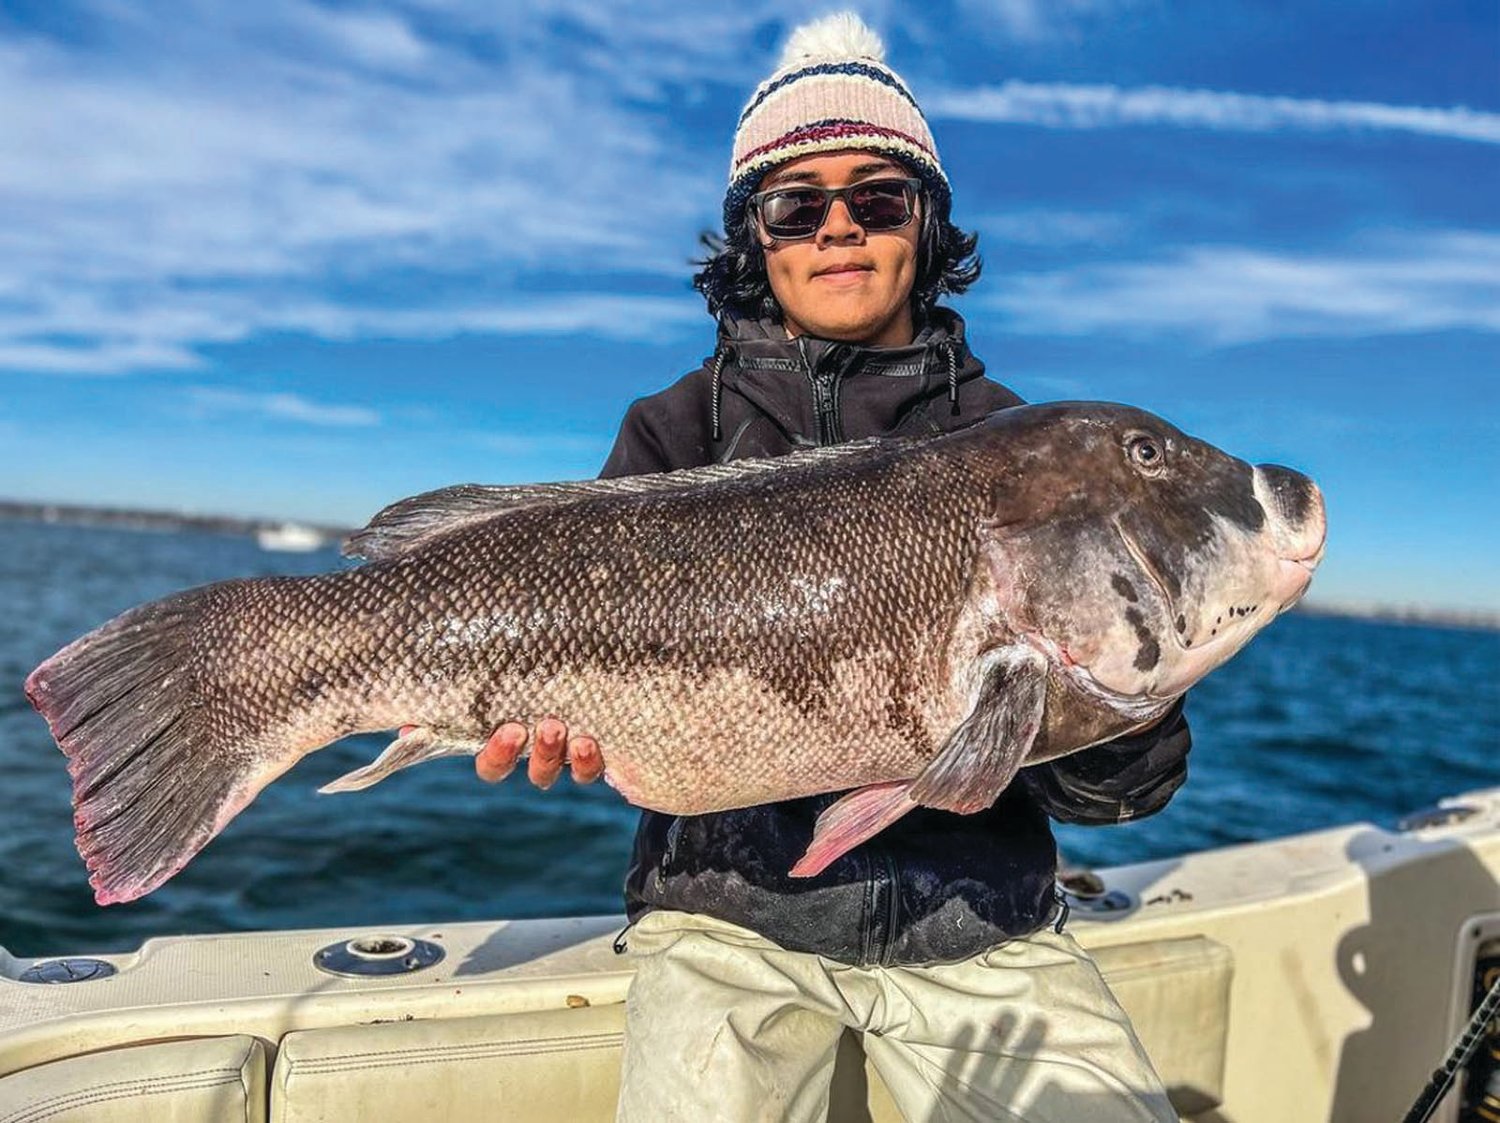 Paul Newman record tautog – Photo D NEW RECORD: Paul Newman of New Jersey caught this RI record tautog, 21.57 pounds when fishing with Tall Tailz Charters off Newport last week.